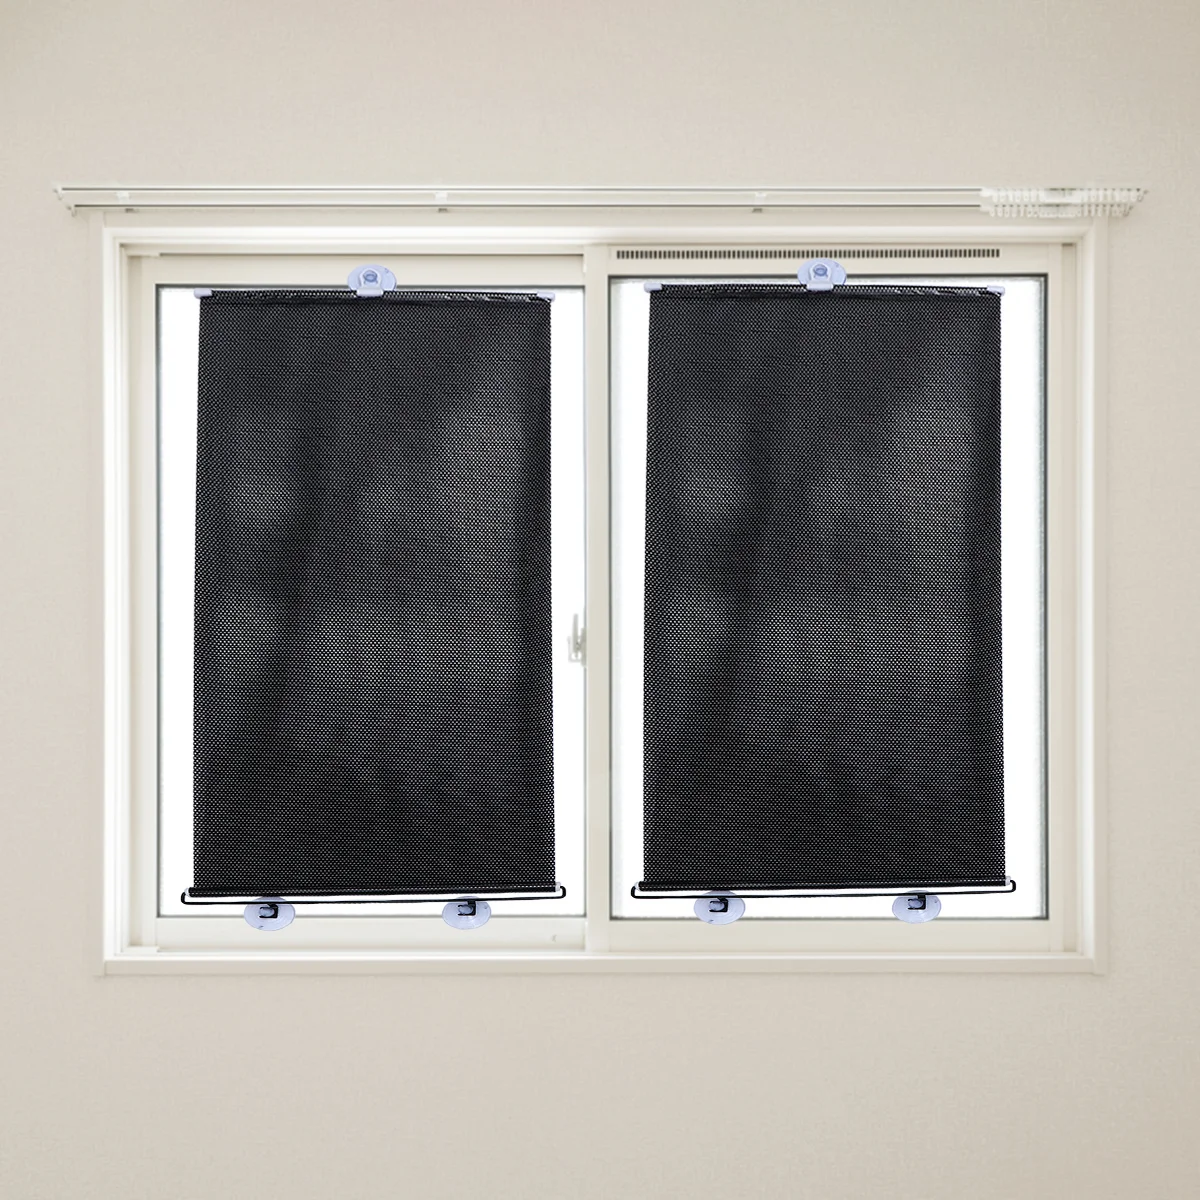 

Blackout Blind Curtain Sunshades Car Shades Roller Blinds Indoor Window Shutters Suction Cup Blinds Lampshade Skylight Shades